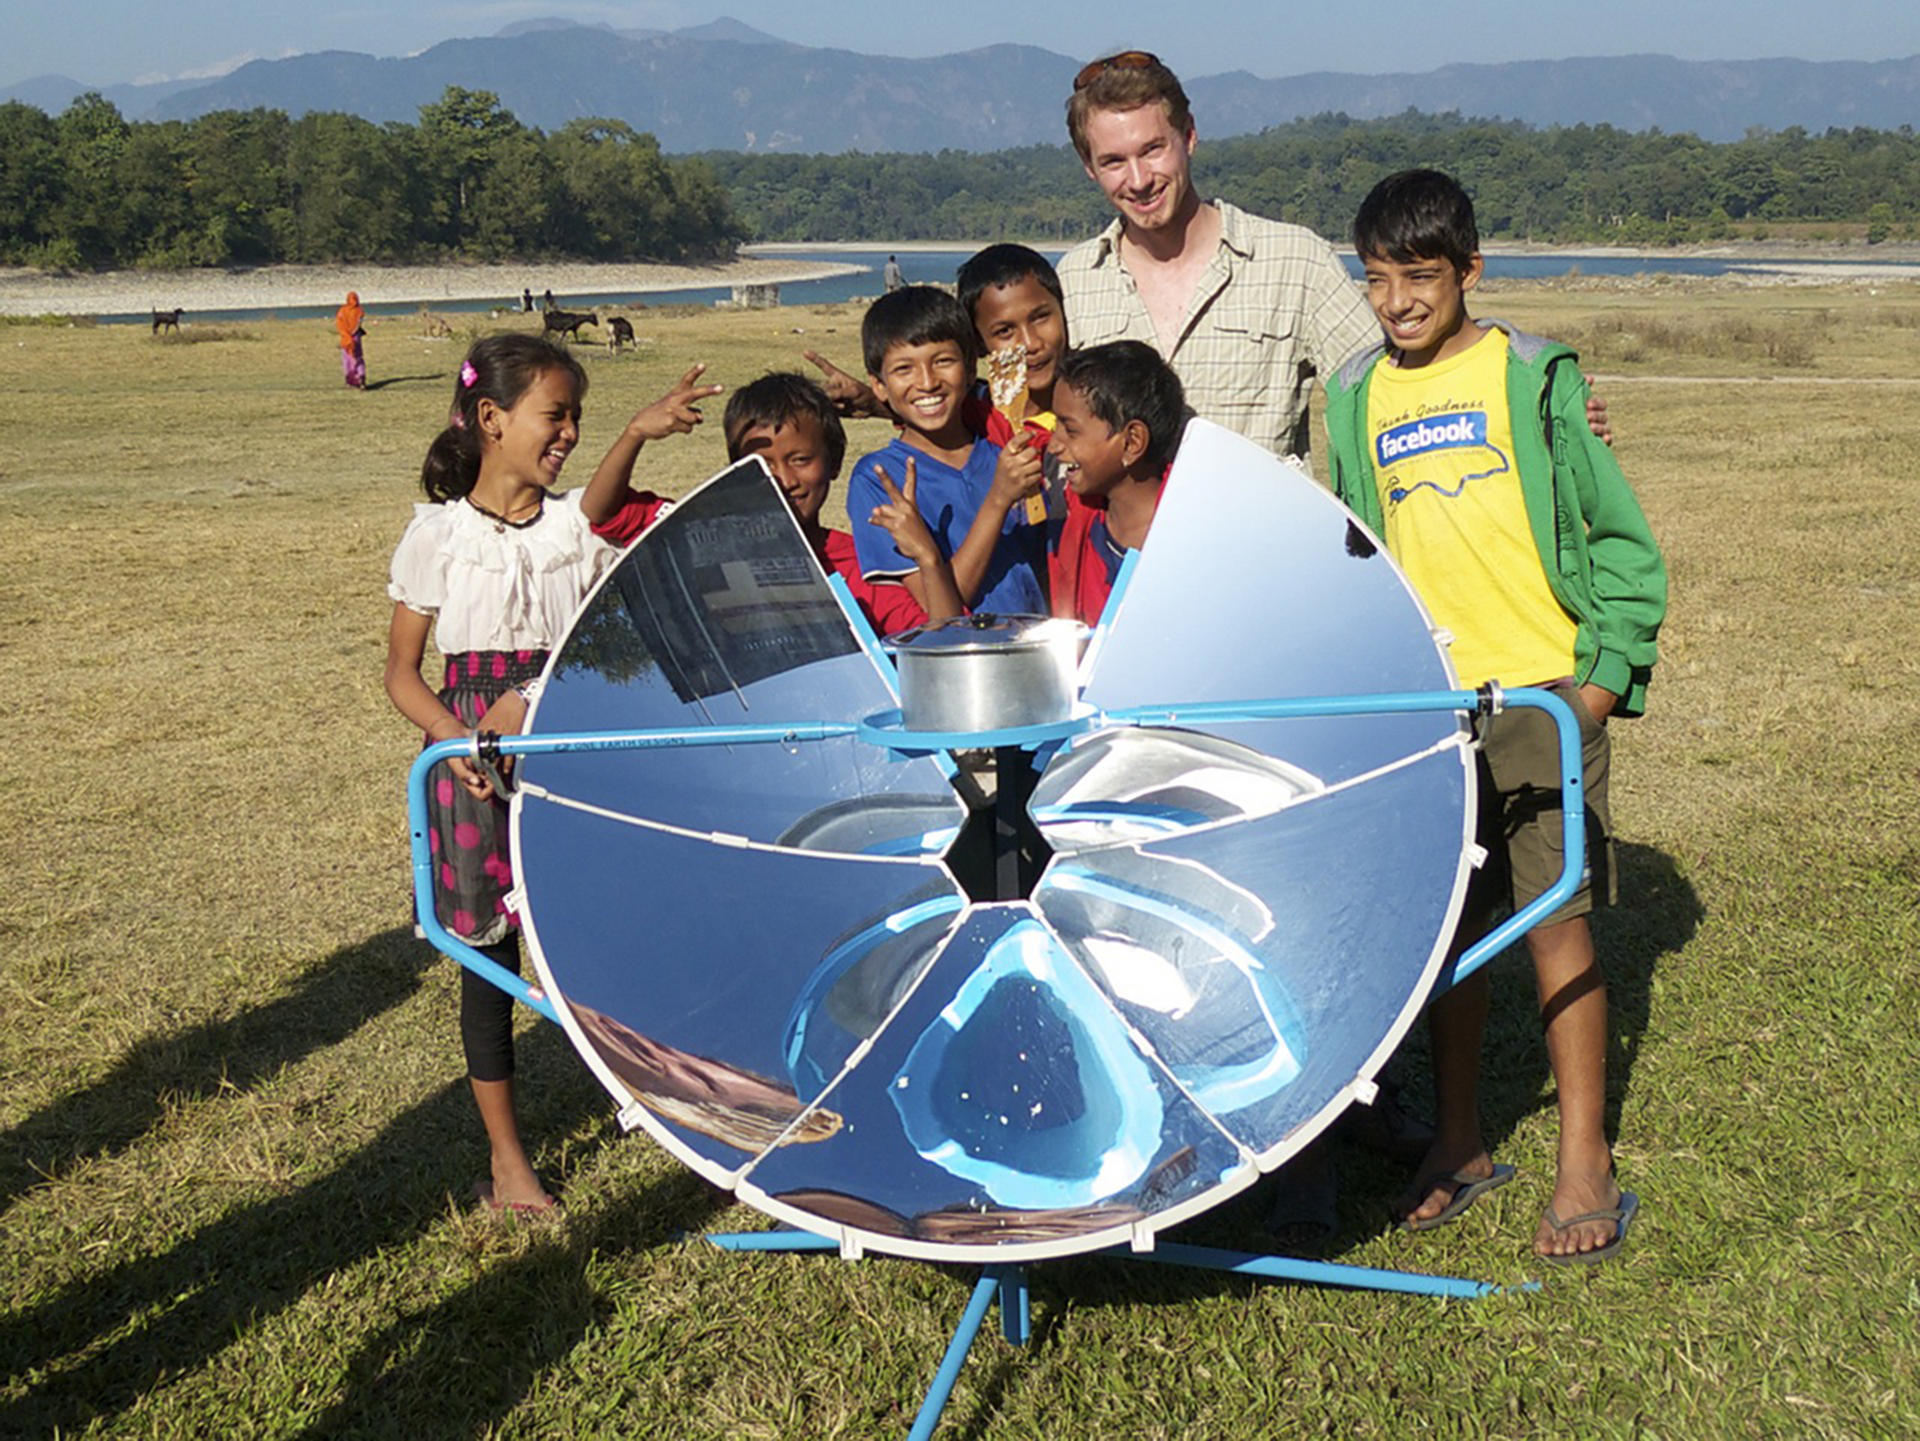 Scot Frank shows off the first version of his SolSource solar cooker in Nepal. Photo: One Earth Designs